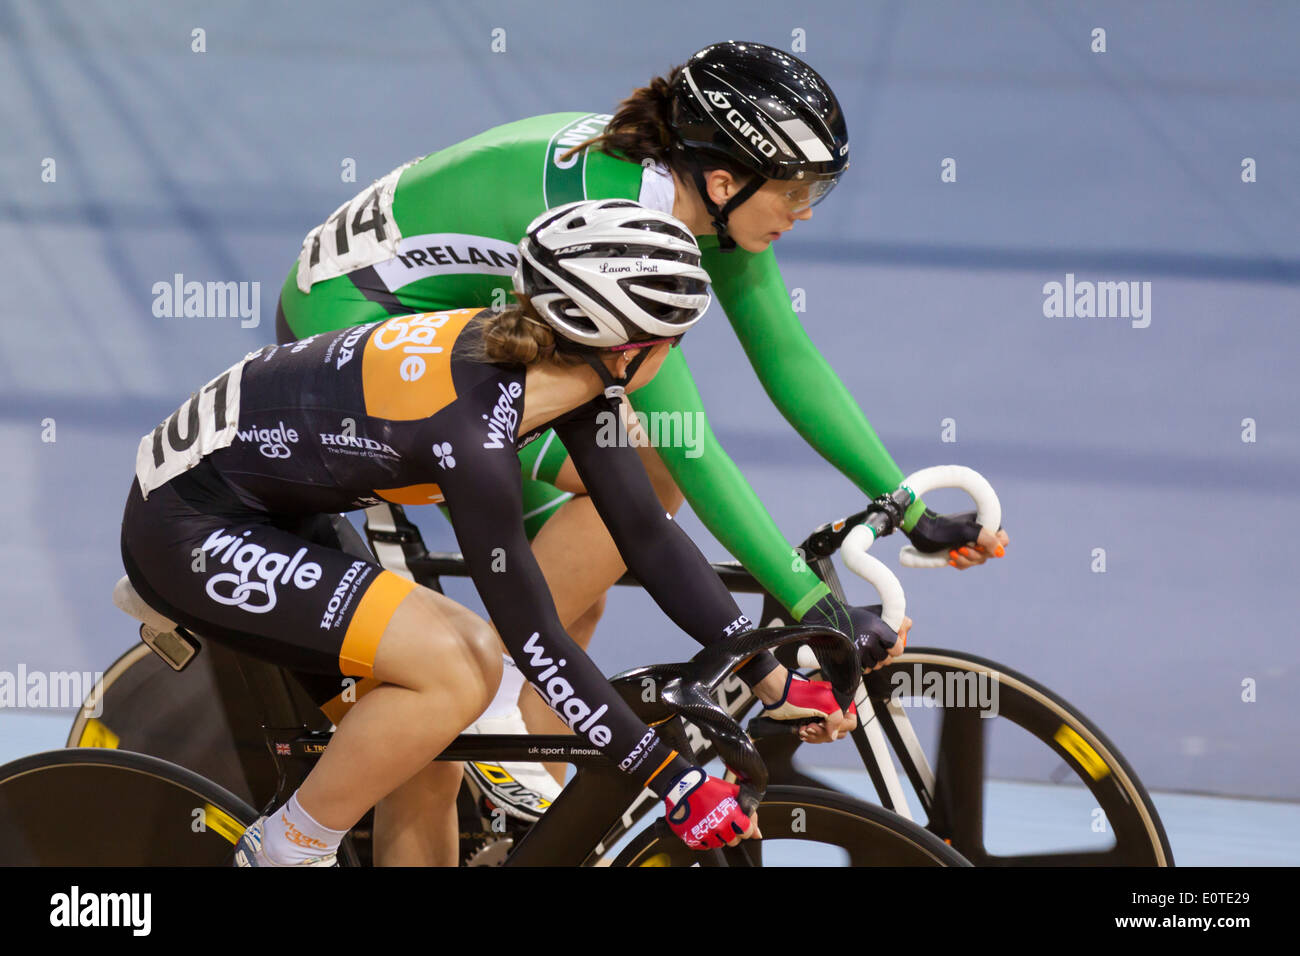 Laura Kenny (Laura Trott) (f) and Caroline Ryan (b) compete in the Women's Omnium at Revolution 5 2014, Lee Valley Velopark Stock Photo